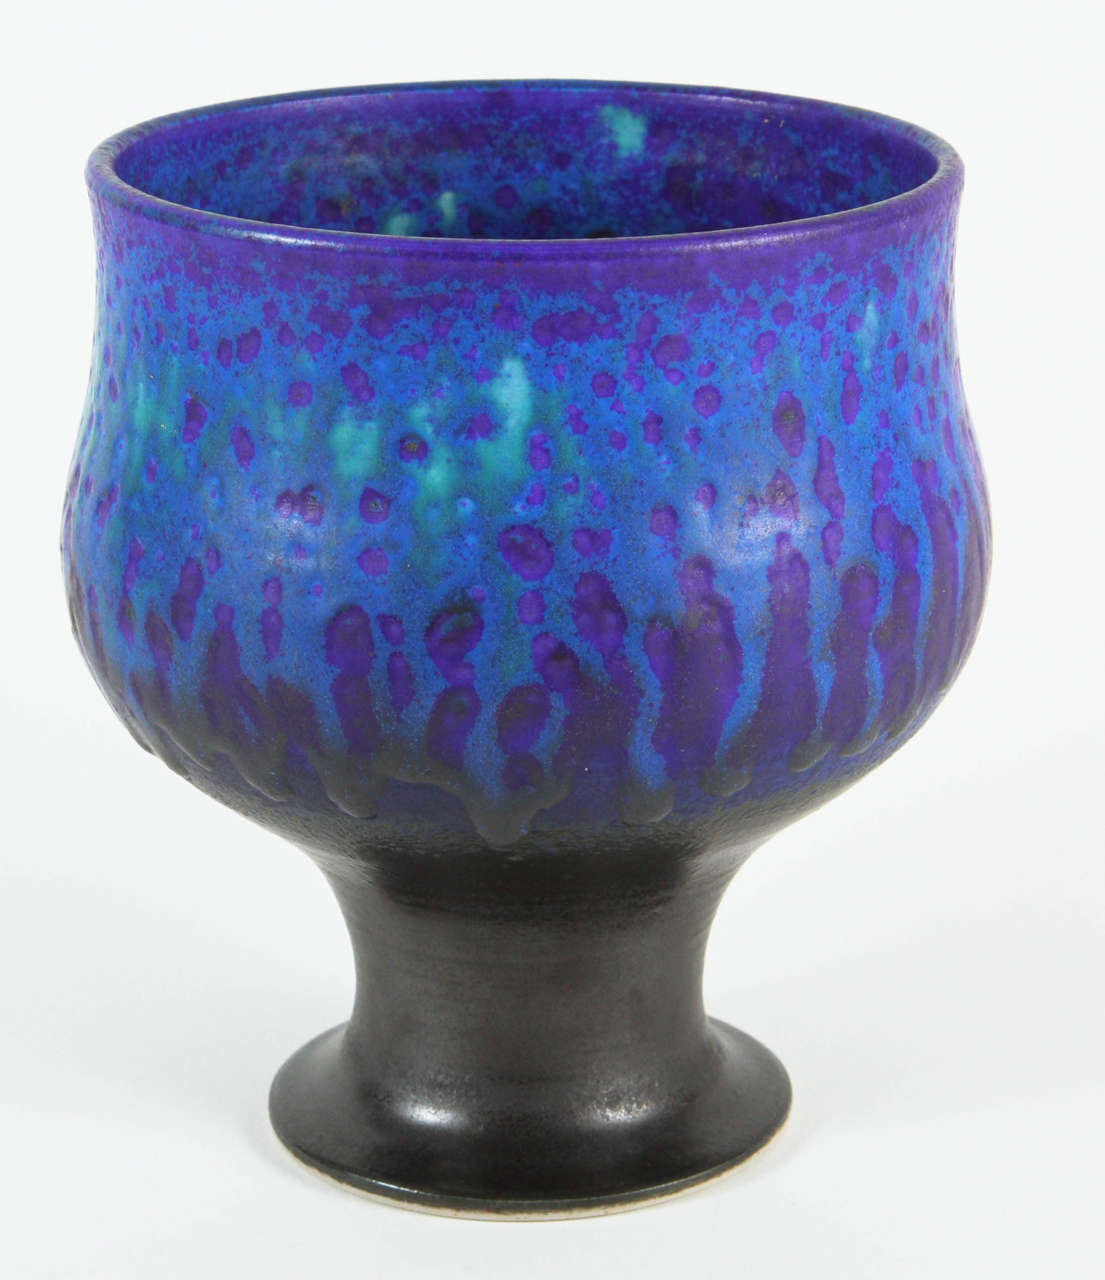 An oversized chalice form vase from the art studios of Arabia, the preeminent ceramic firm of Finland. The colors are accurately represented. Mint condition.